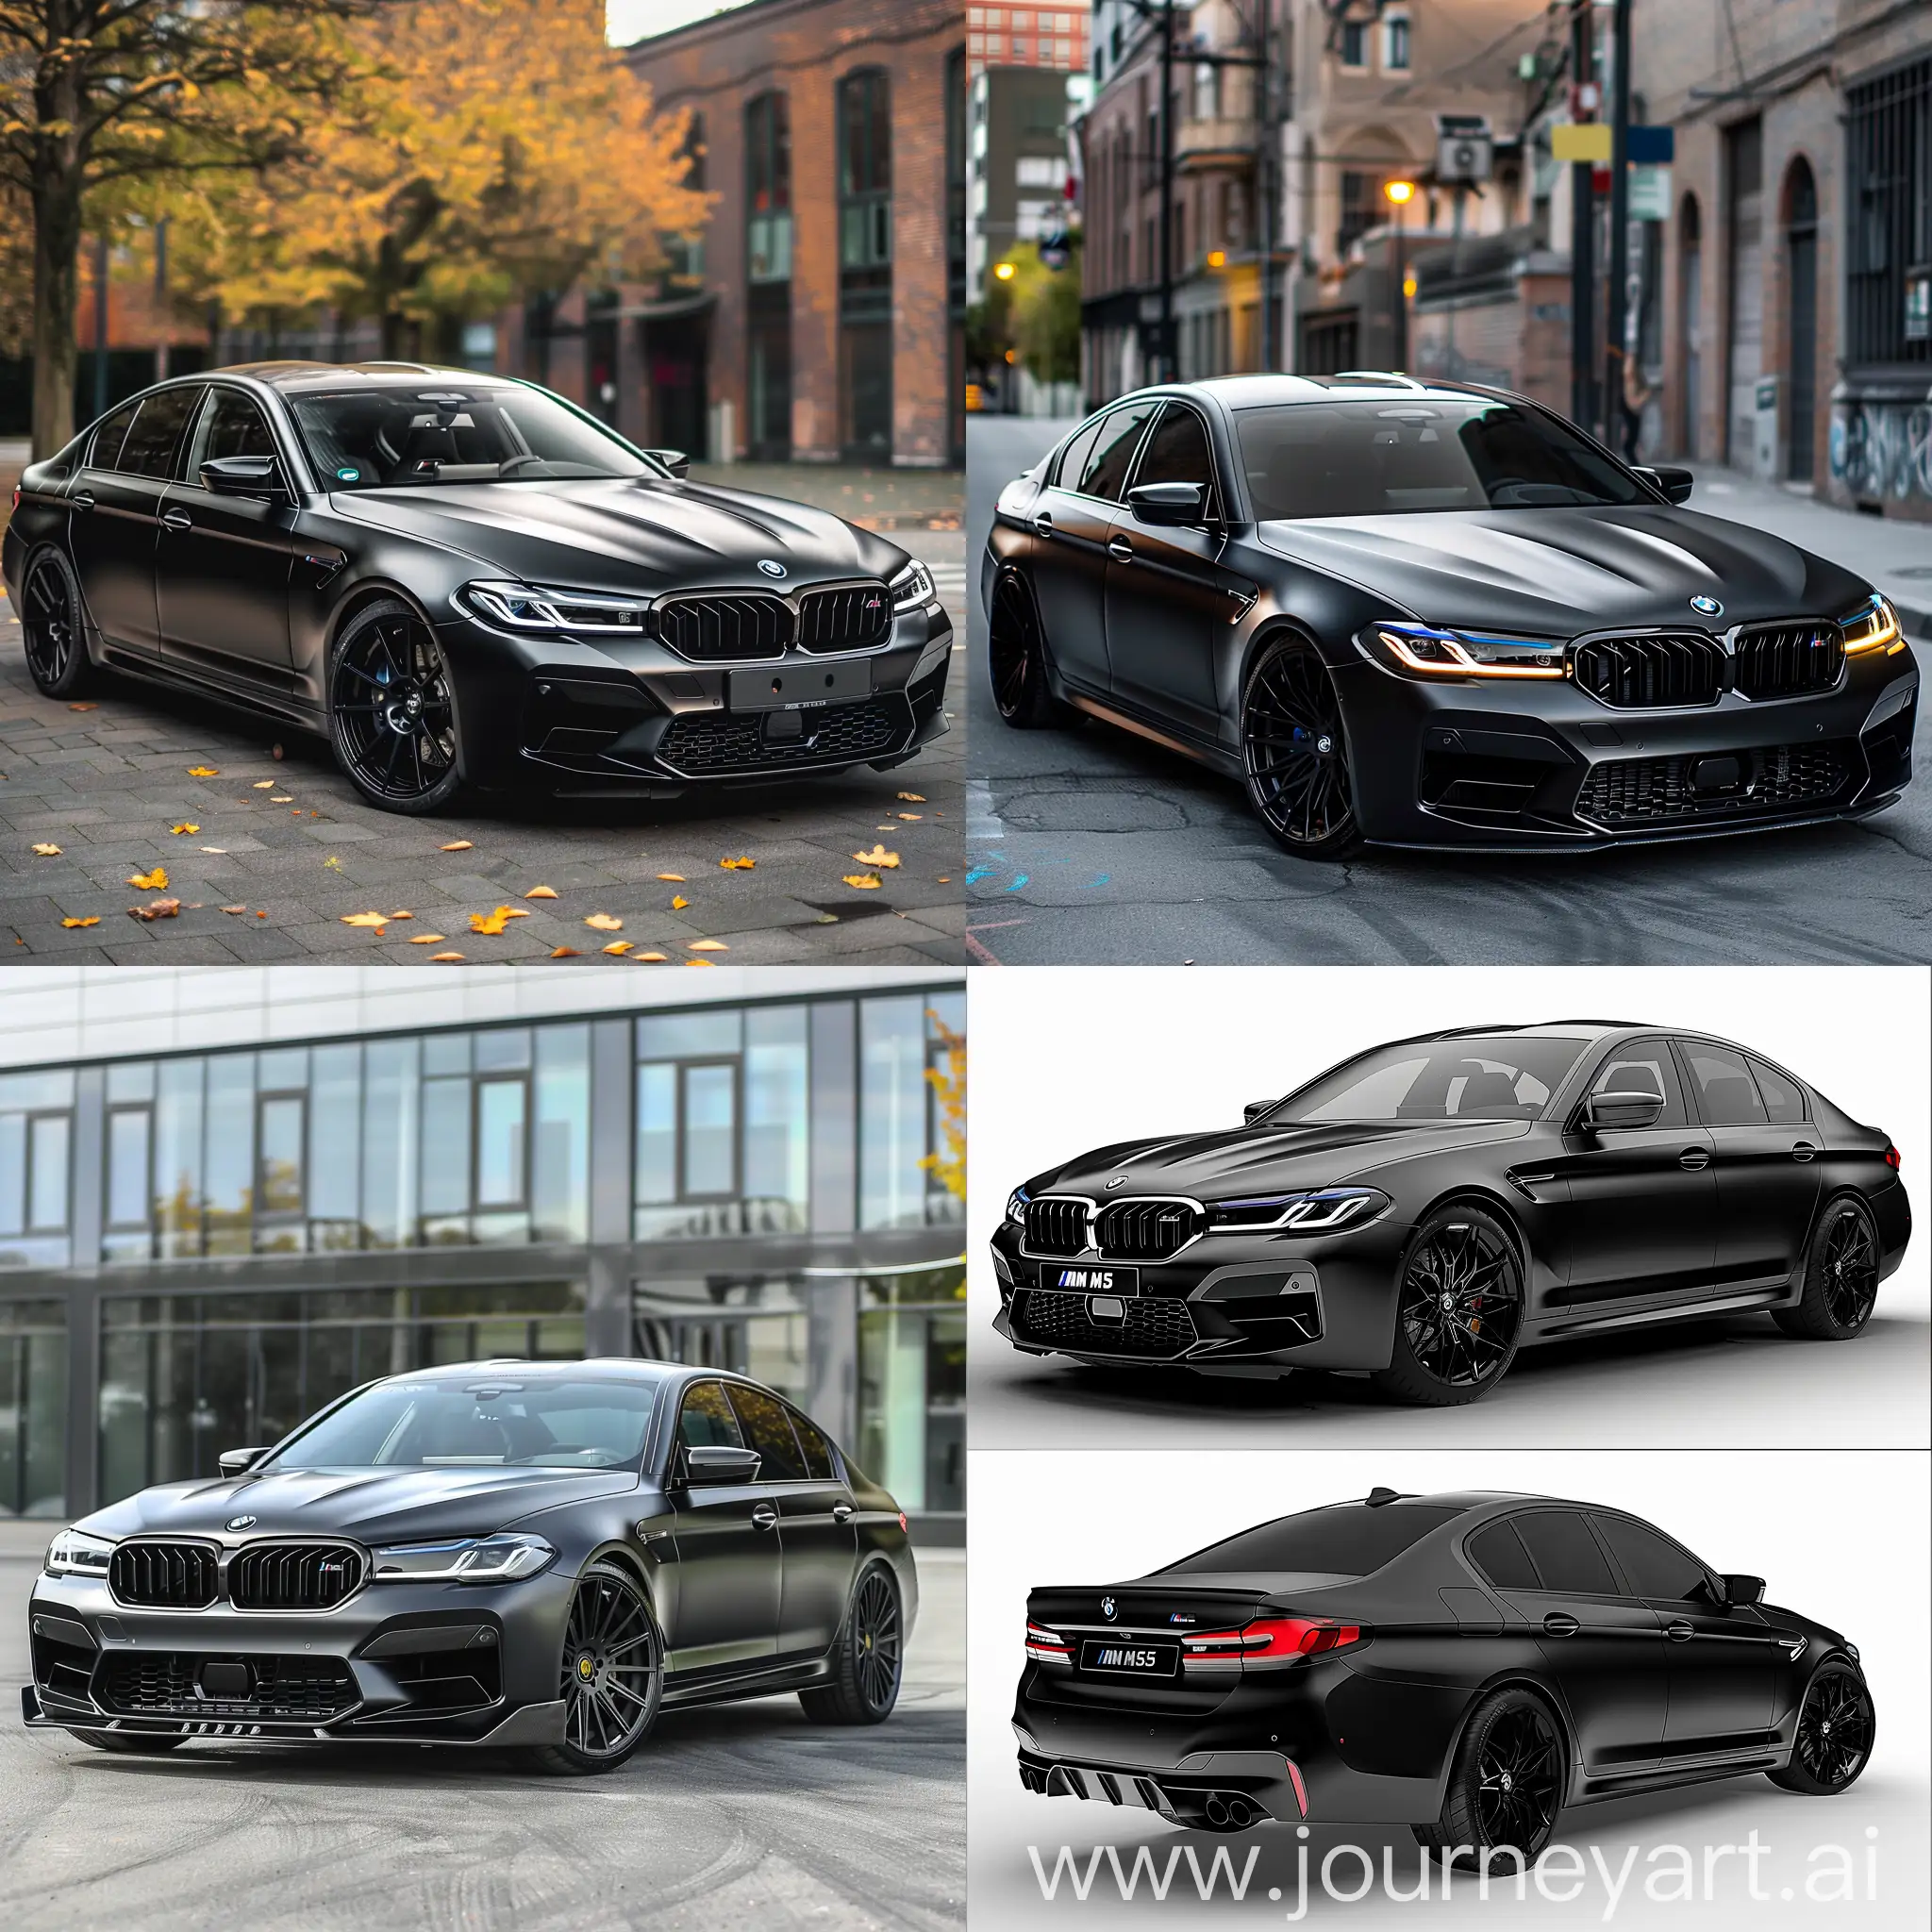 Futuristic-BMW-M5-with-Competition-Kit-in-Special-Matte-Black-2026-Wallpaper